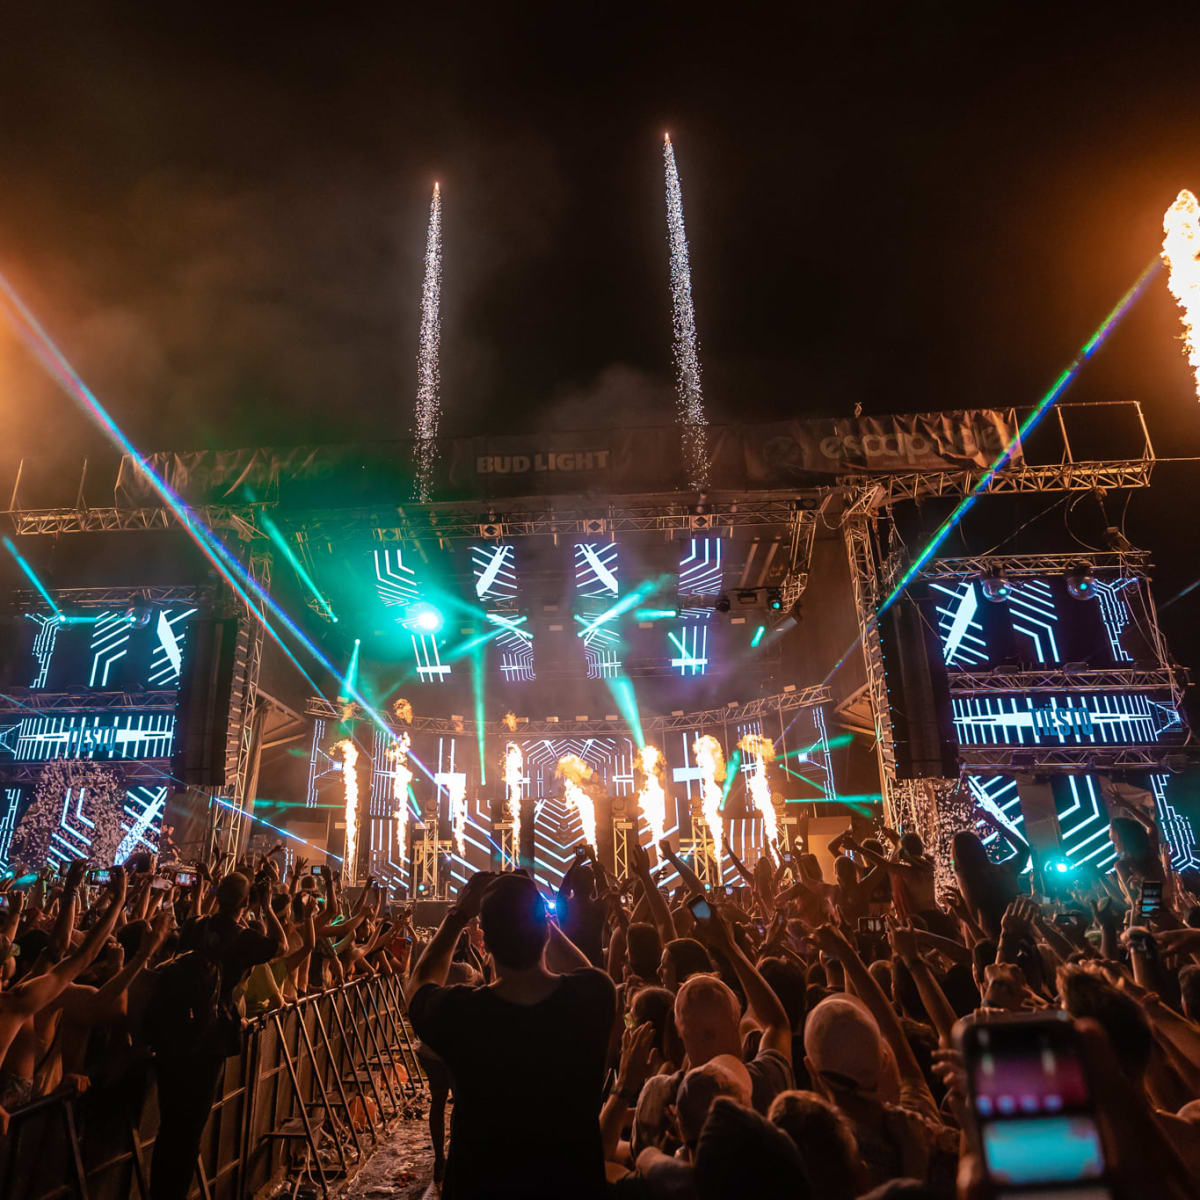 The Chainsmokers, ILLENIUM, More Set to Headline Escapade 2021  -  The Latest Electronic Dance Music News, Reviews & Artists